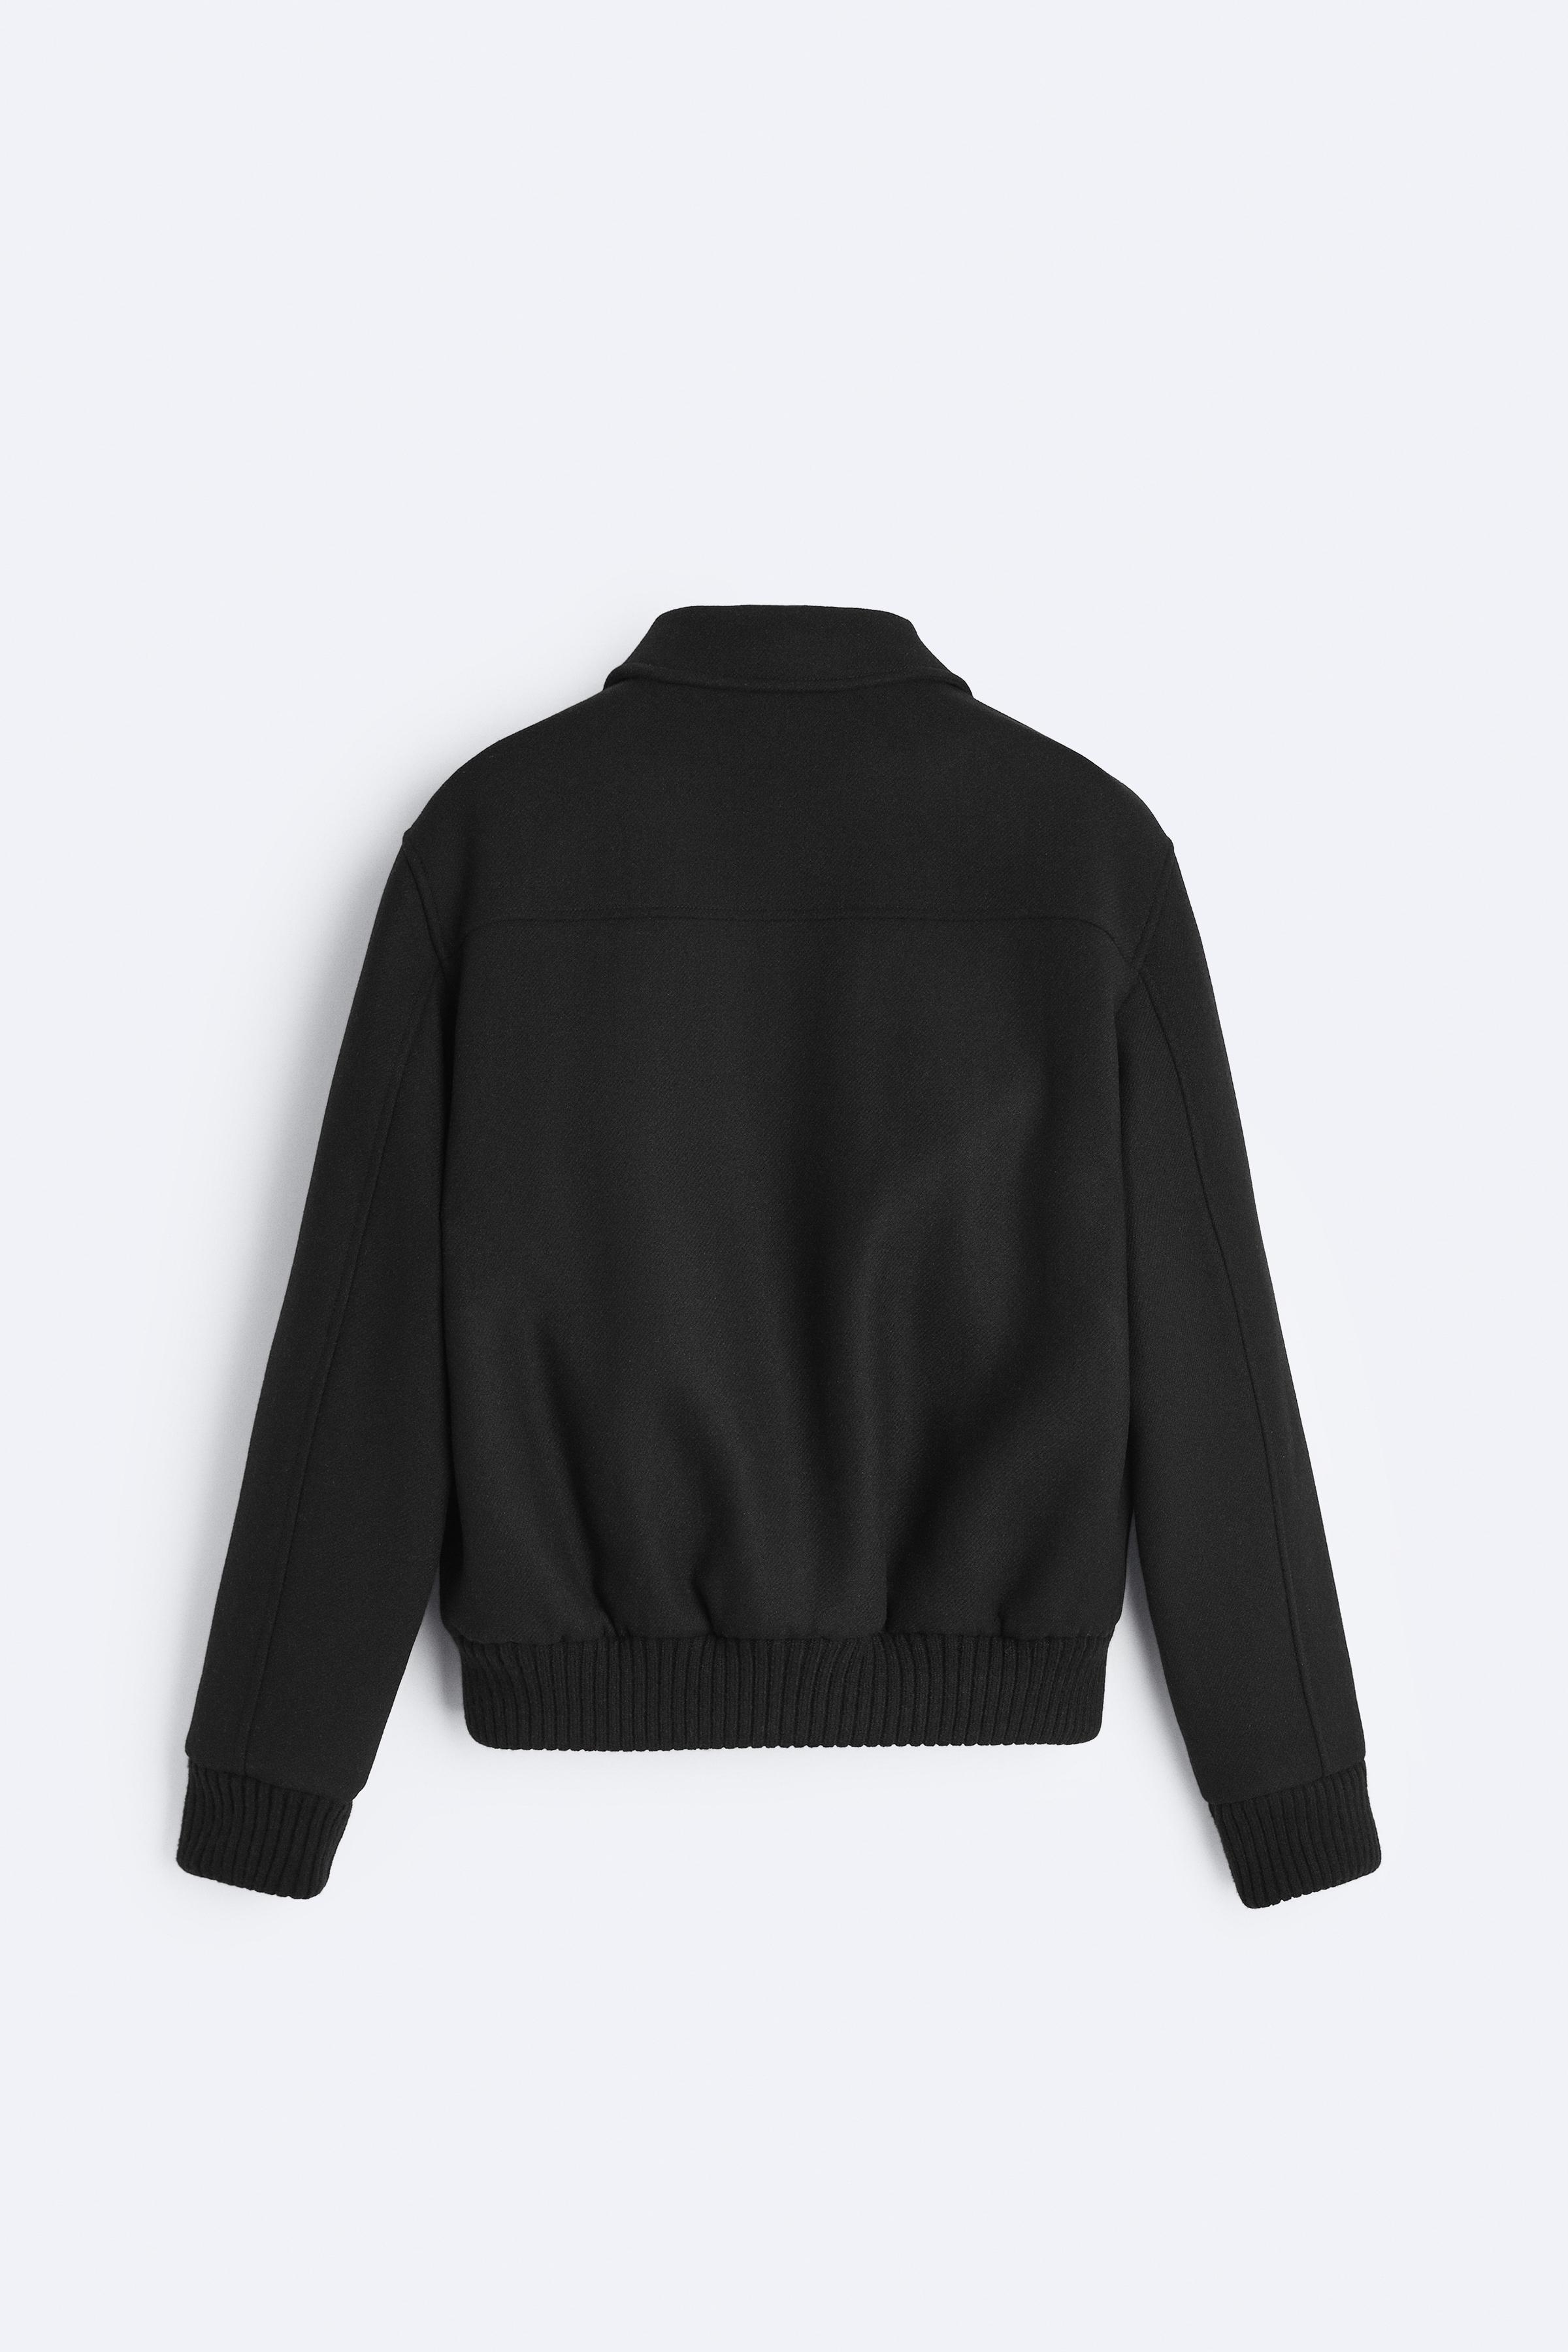 WOOL BLEND JACKET WITH POCKETS - Earth | ZARA United States